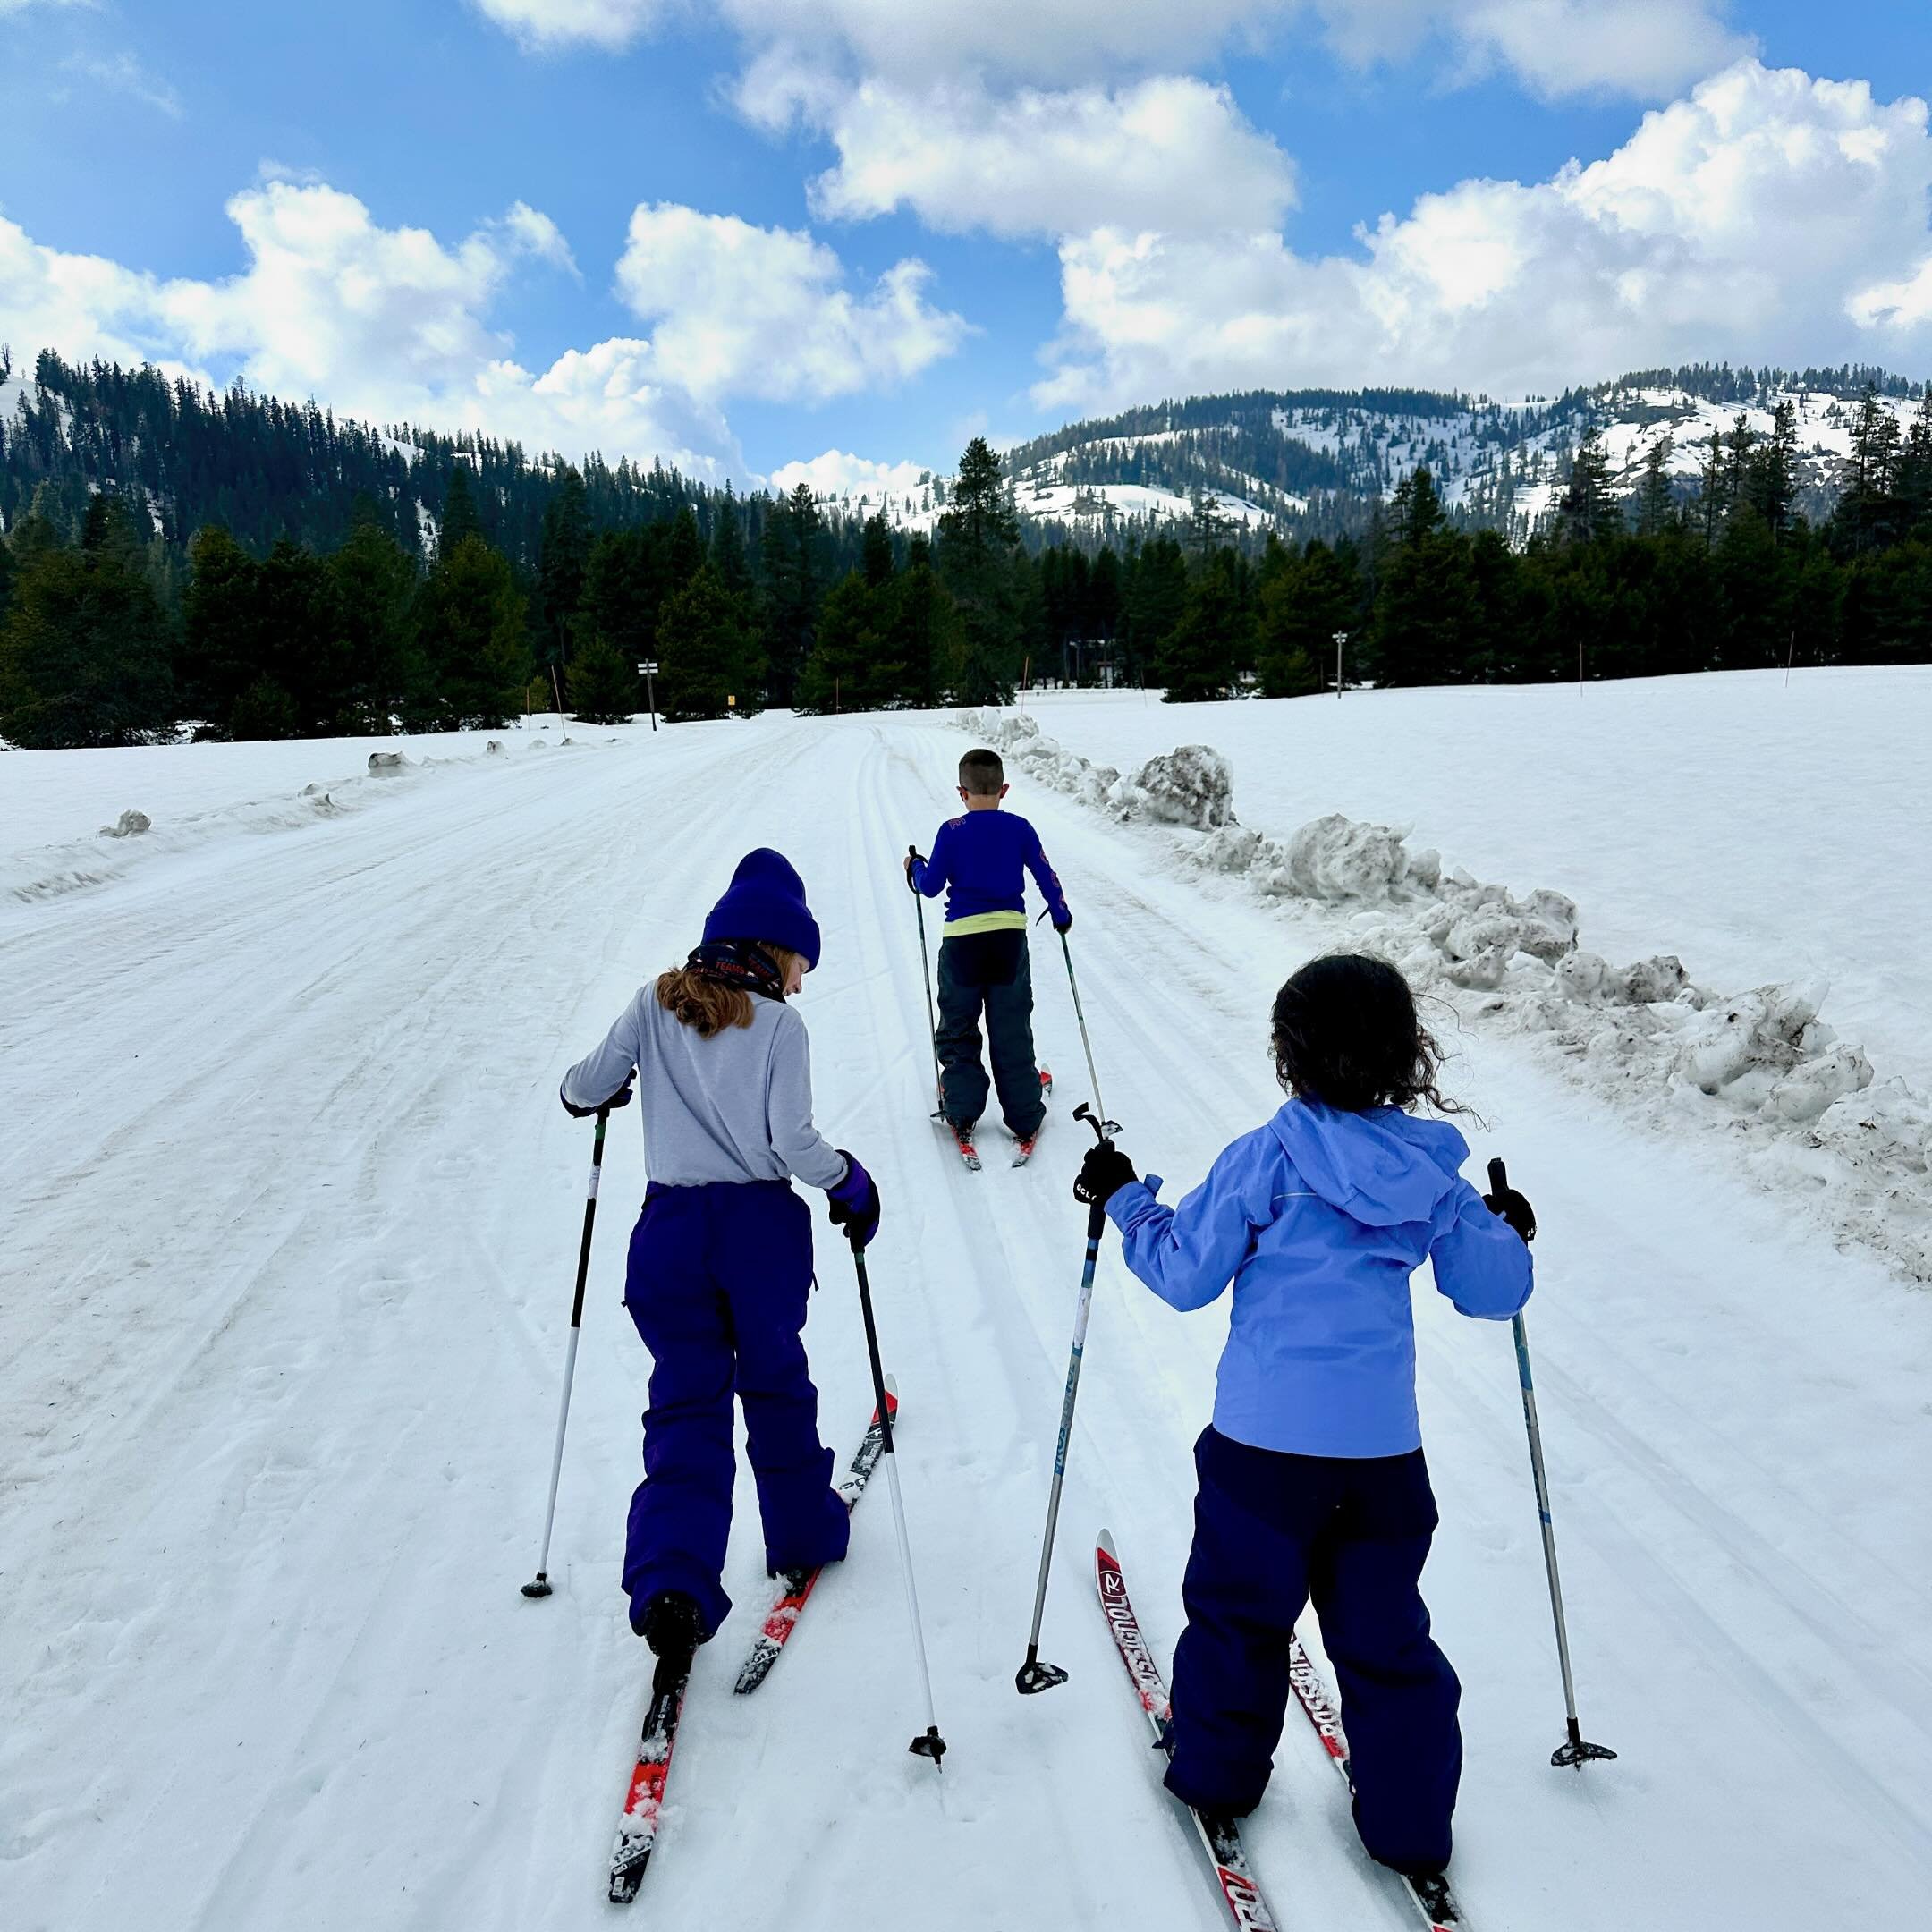 Chasing kindergartners during an after school program from Murphys, CA. Outdoor youth adventures are the best!

#bearvalley #afterschoolprogram #youthempowerment